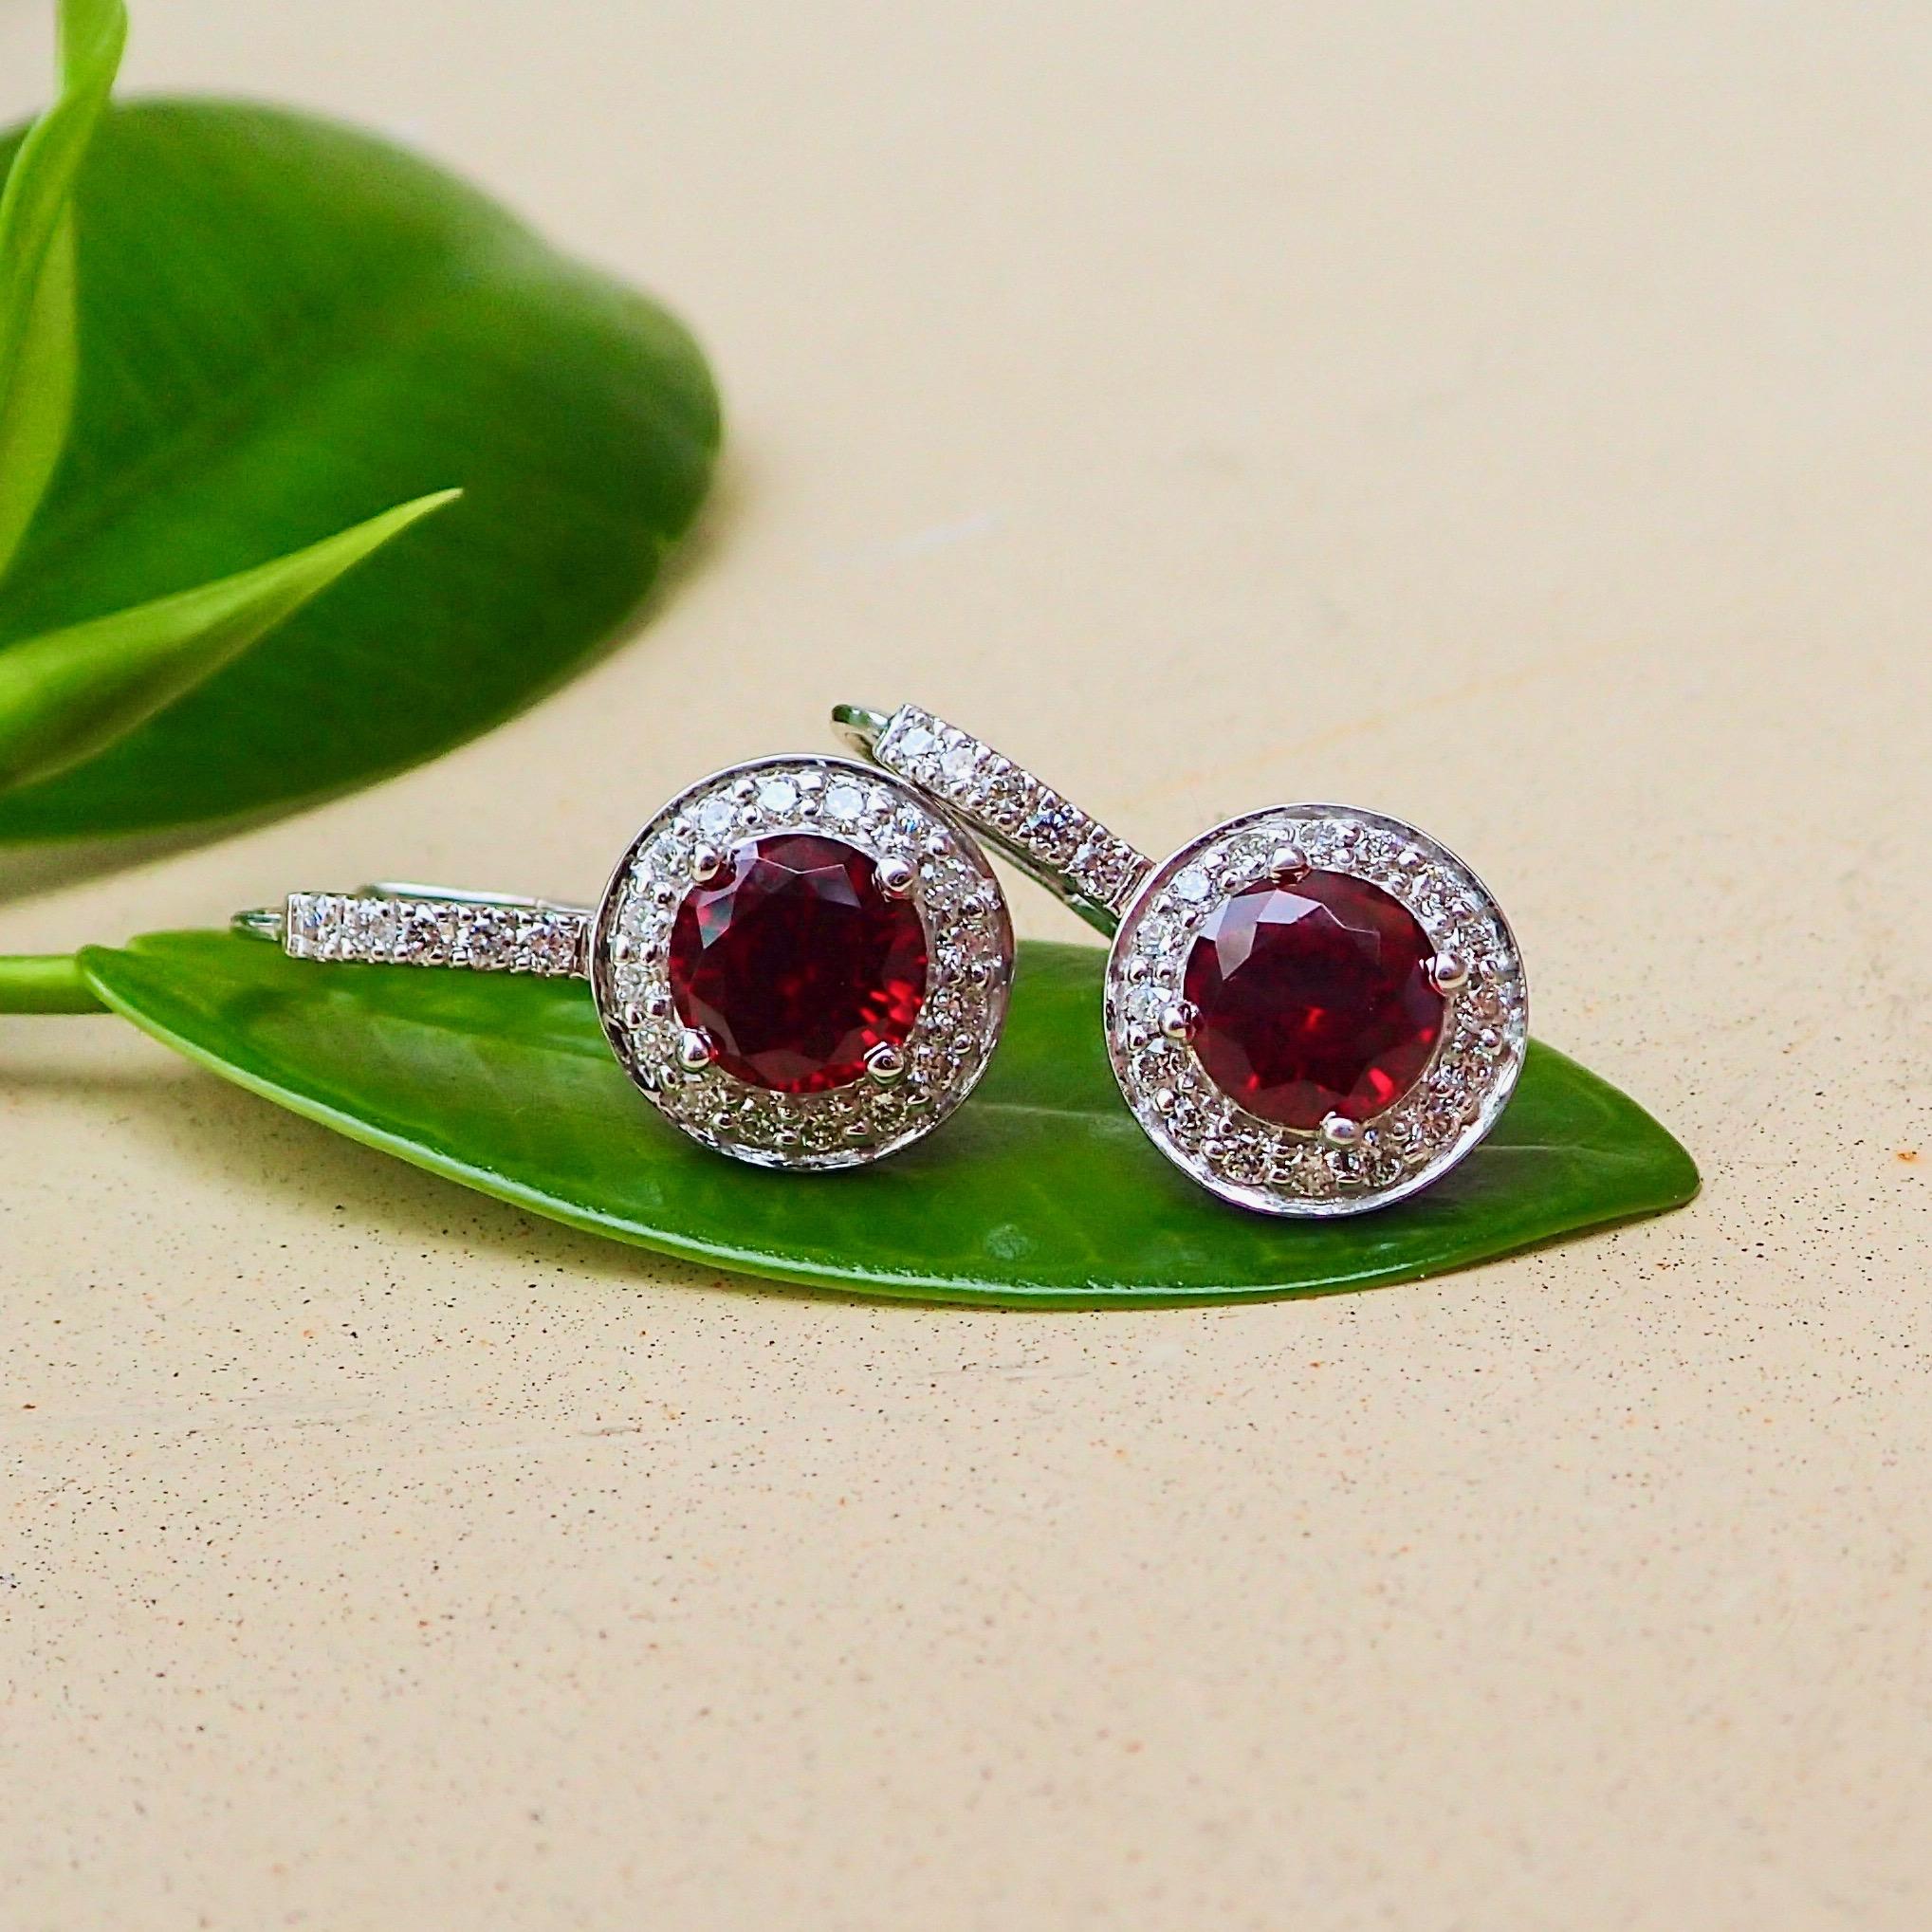 A pair of 18k white gold earrings contain two (2) Round Brilliant Cut Chatham-Created rubies that measure 6mm x 6mm and weigh a total of 2.23 carats with Clarity Grade VS and Fine Color with forty-two (42) Round Brilliant Cut diamonds that measure